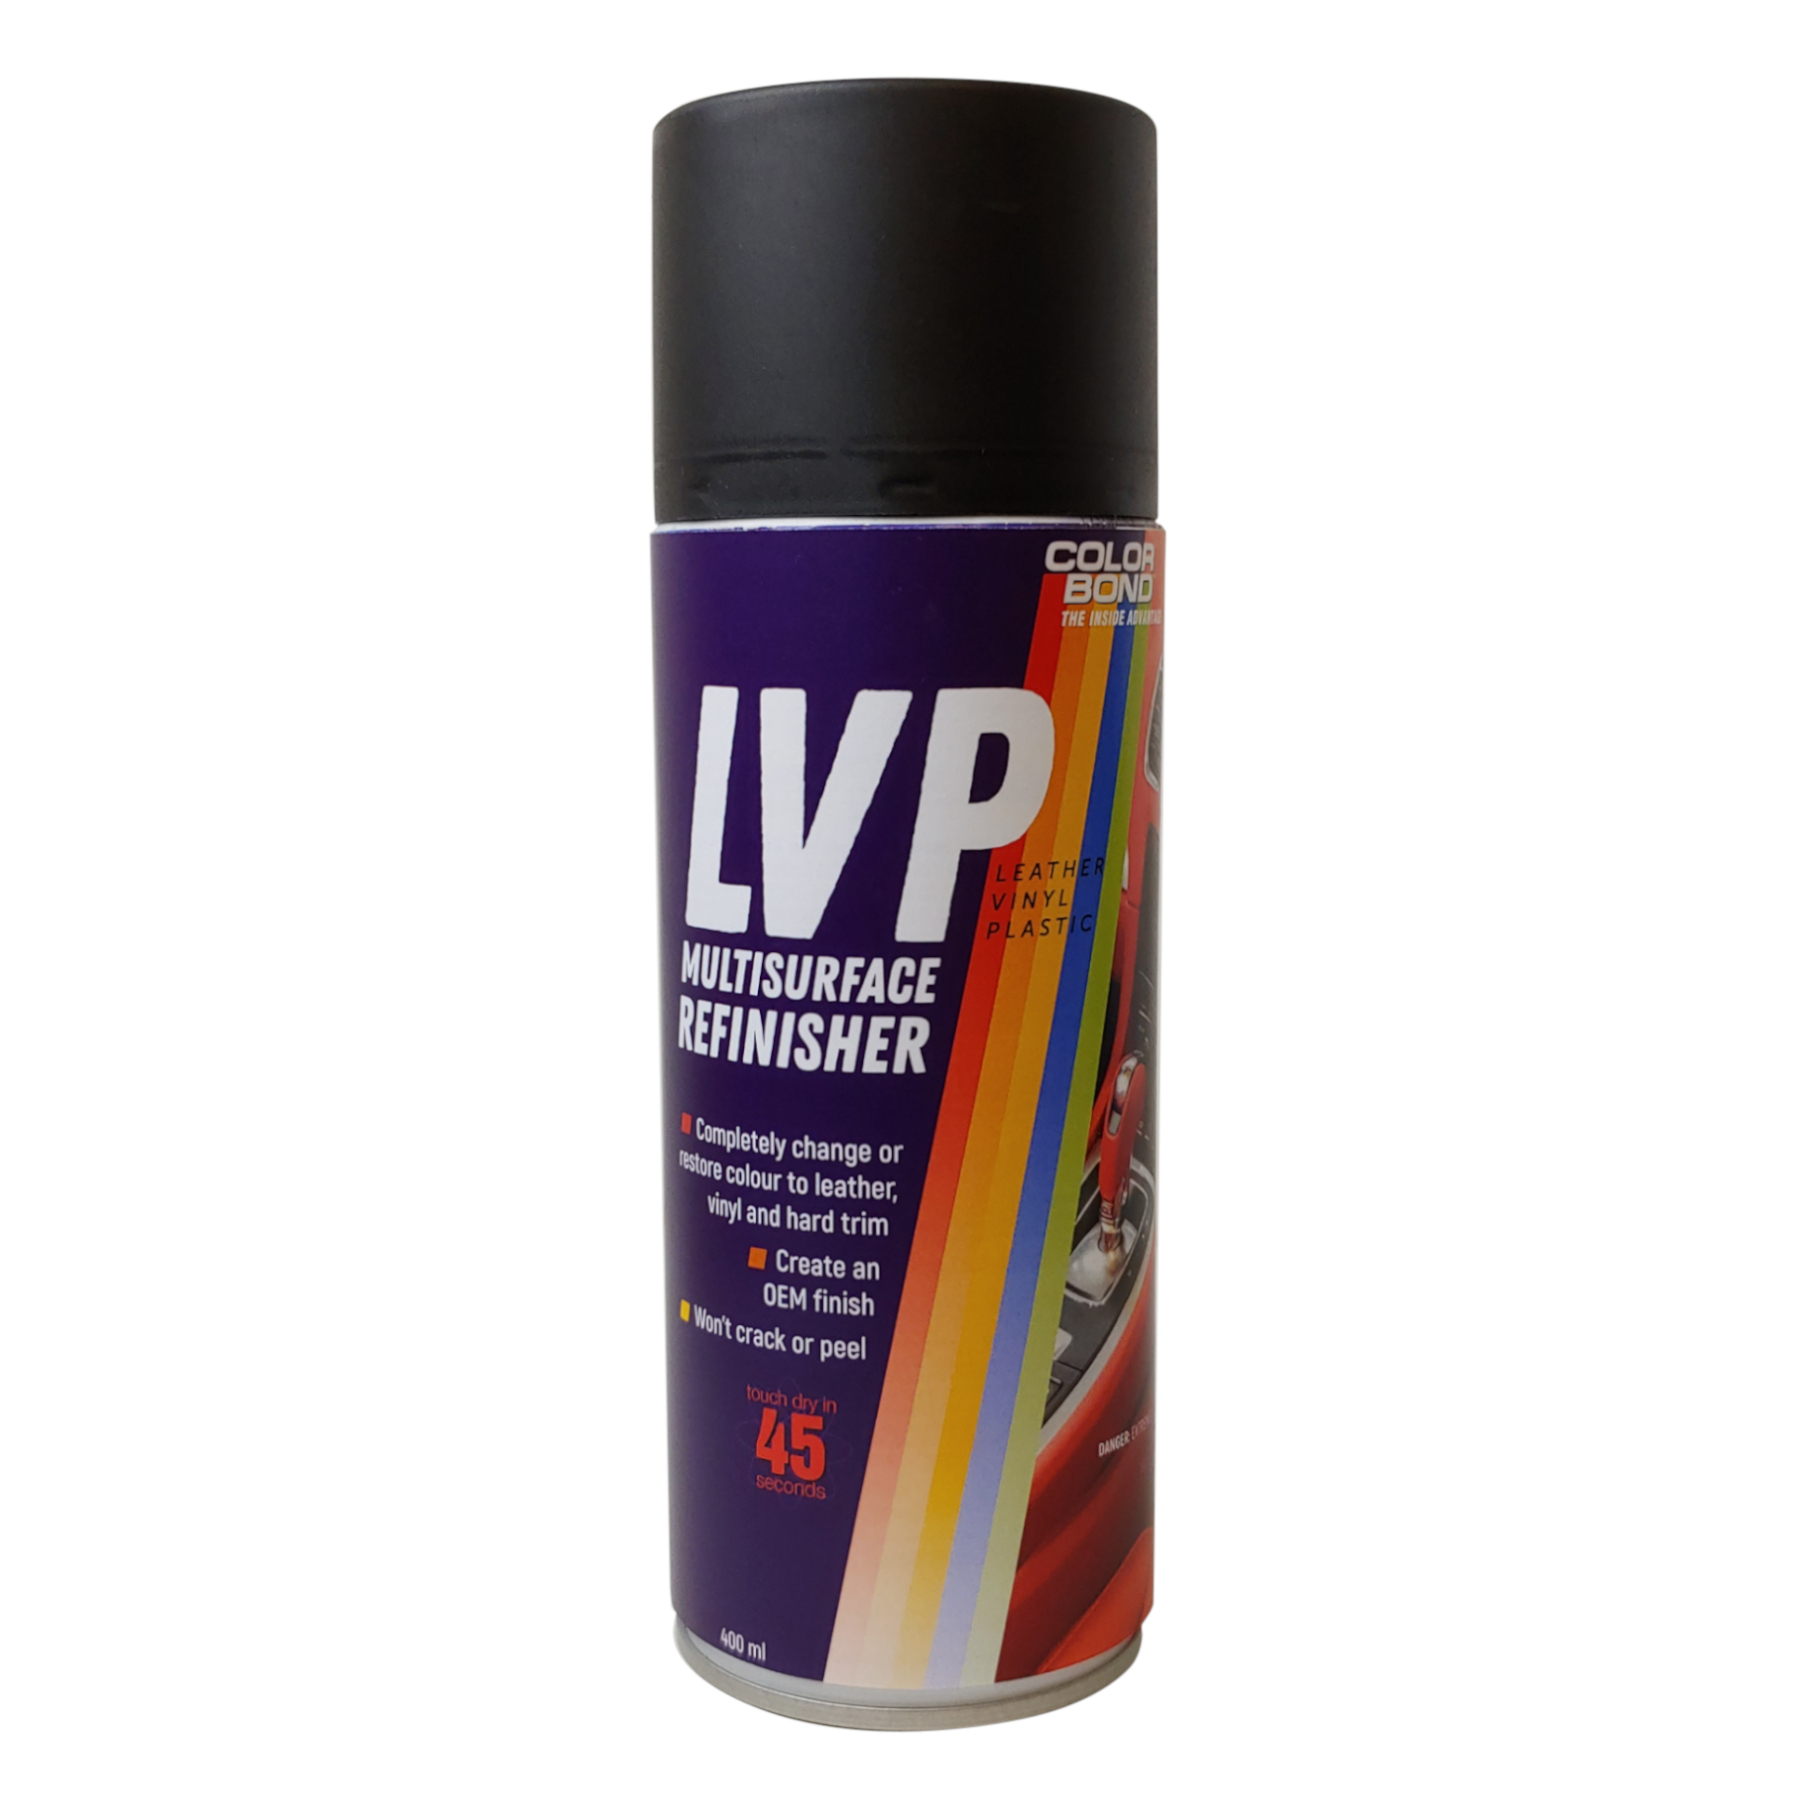 ColorBond LVP Refinisher Spray Paint Review • Snitch'd